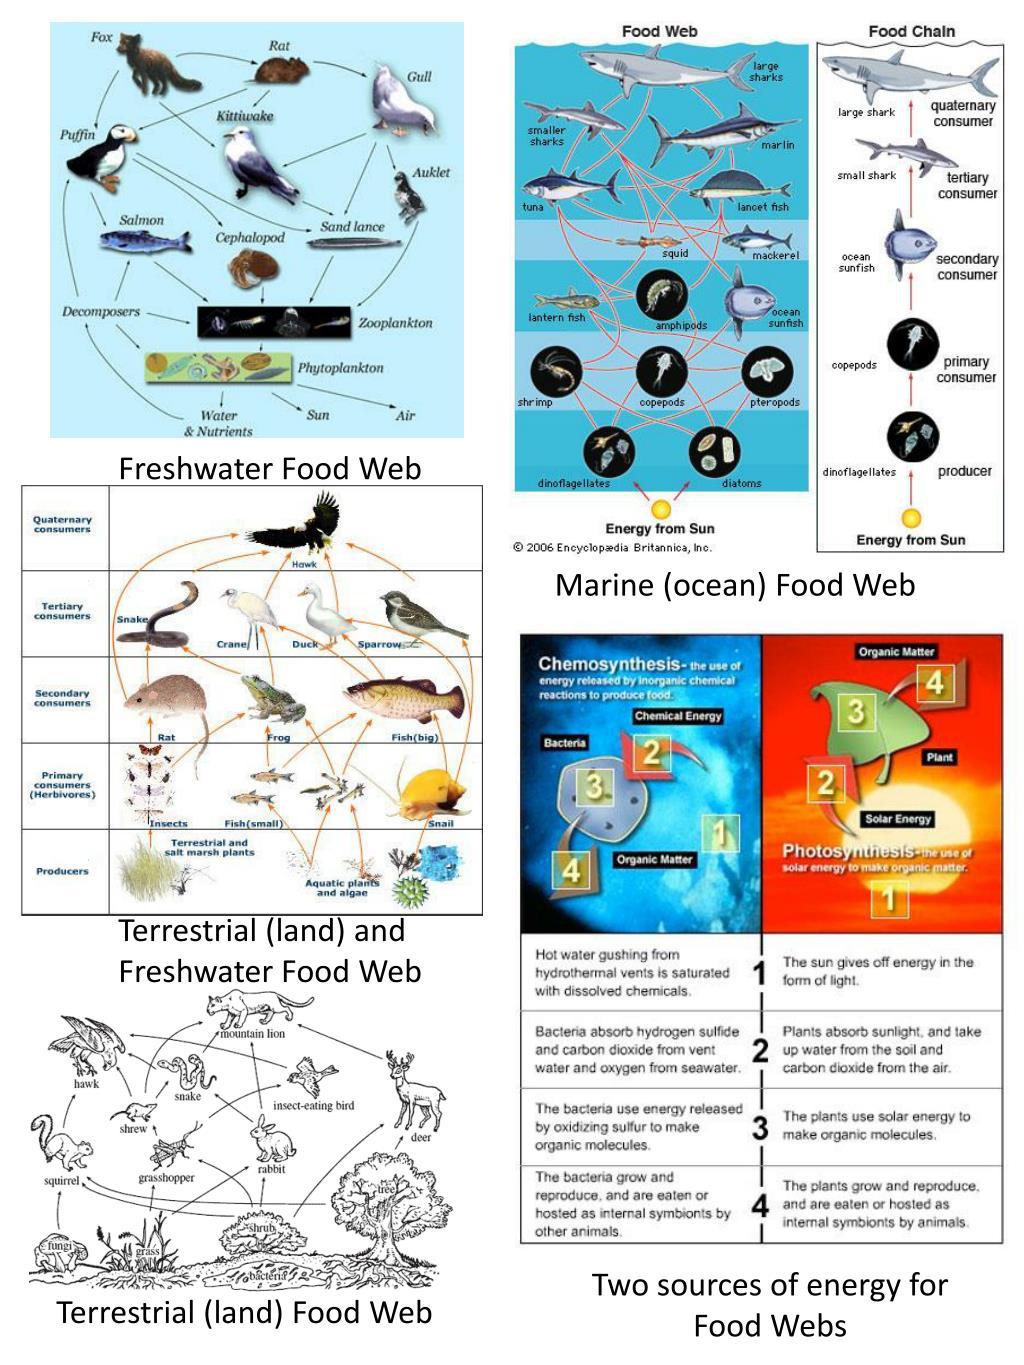 PPT Freshwater Food Web PowerPoint Presentation, free download ID